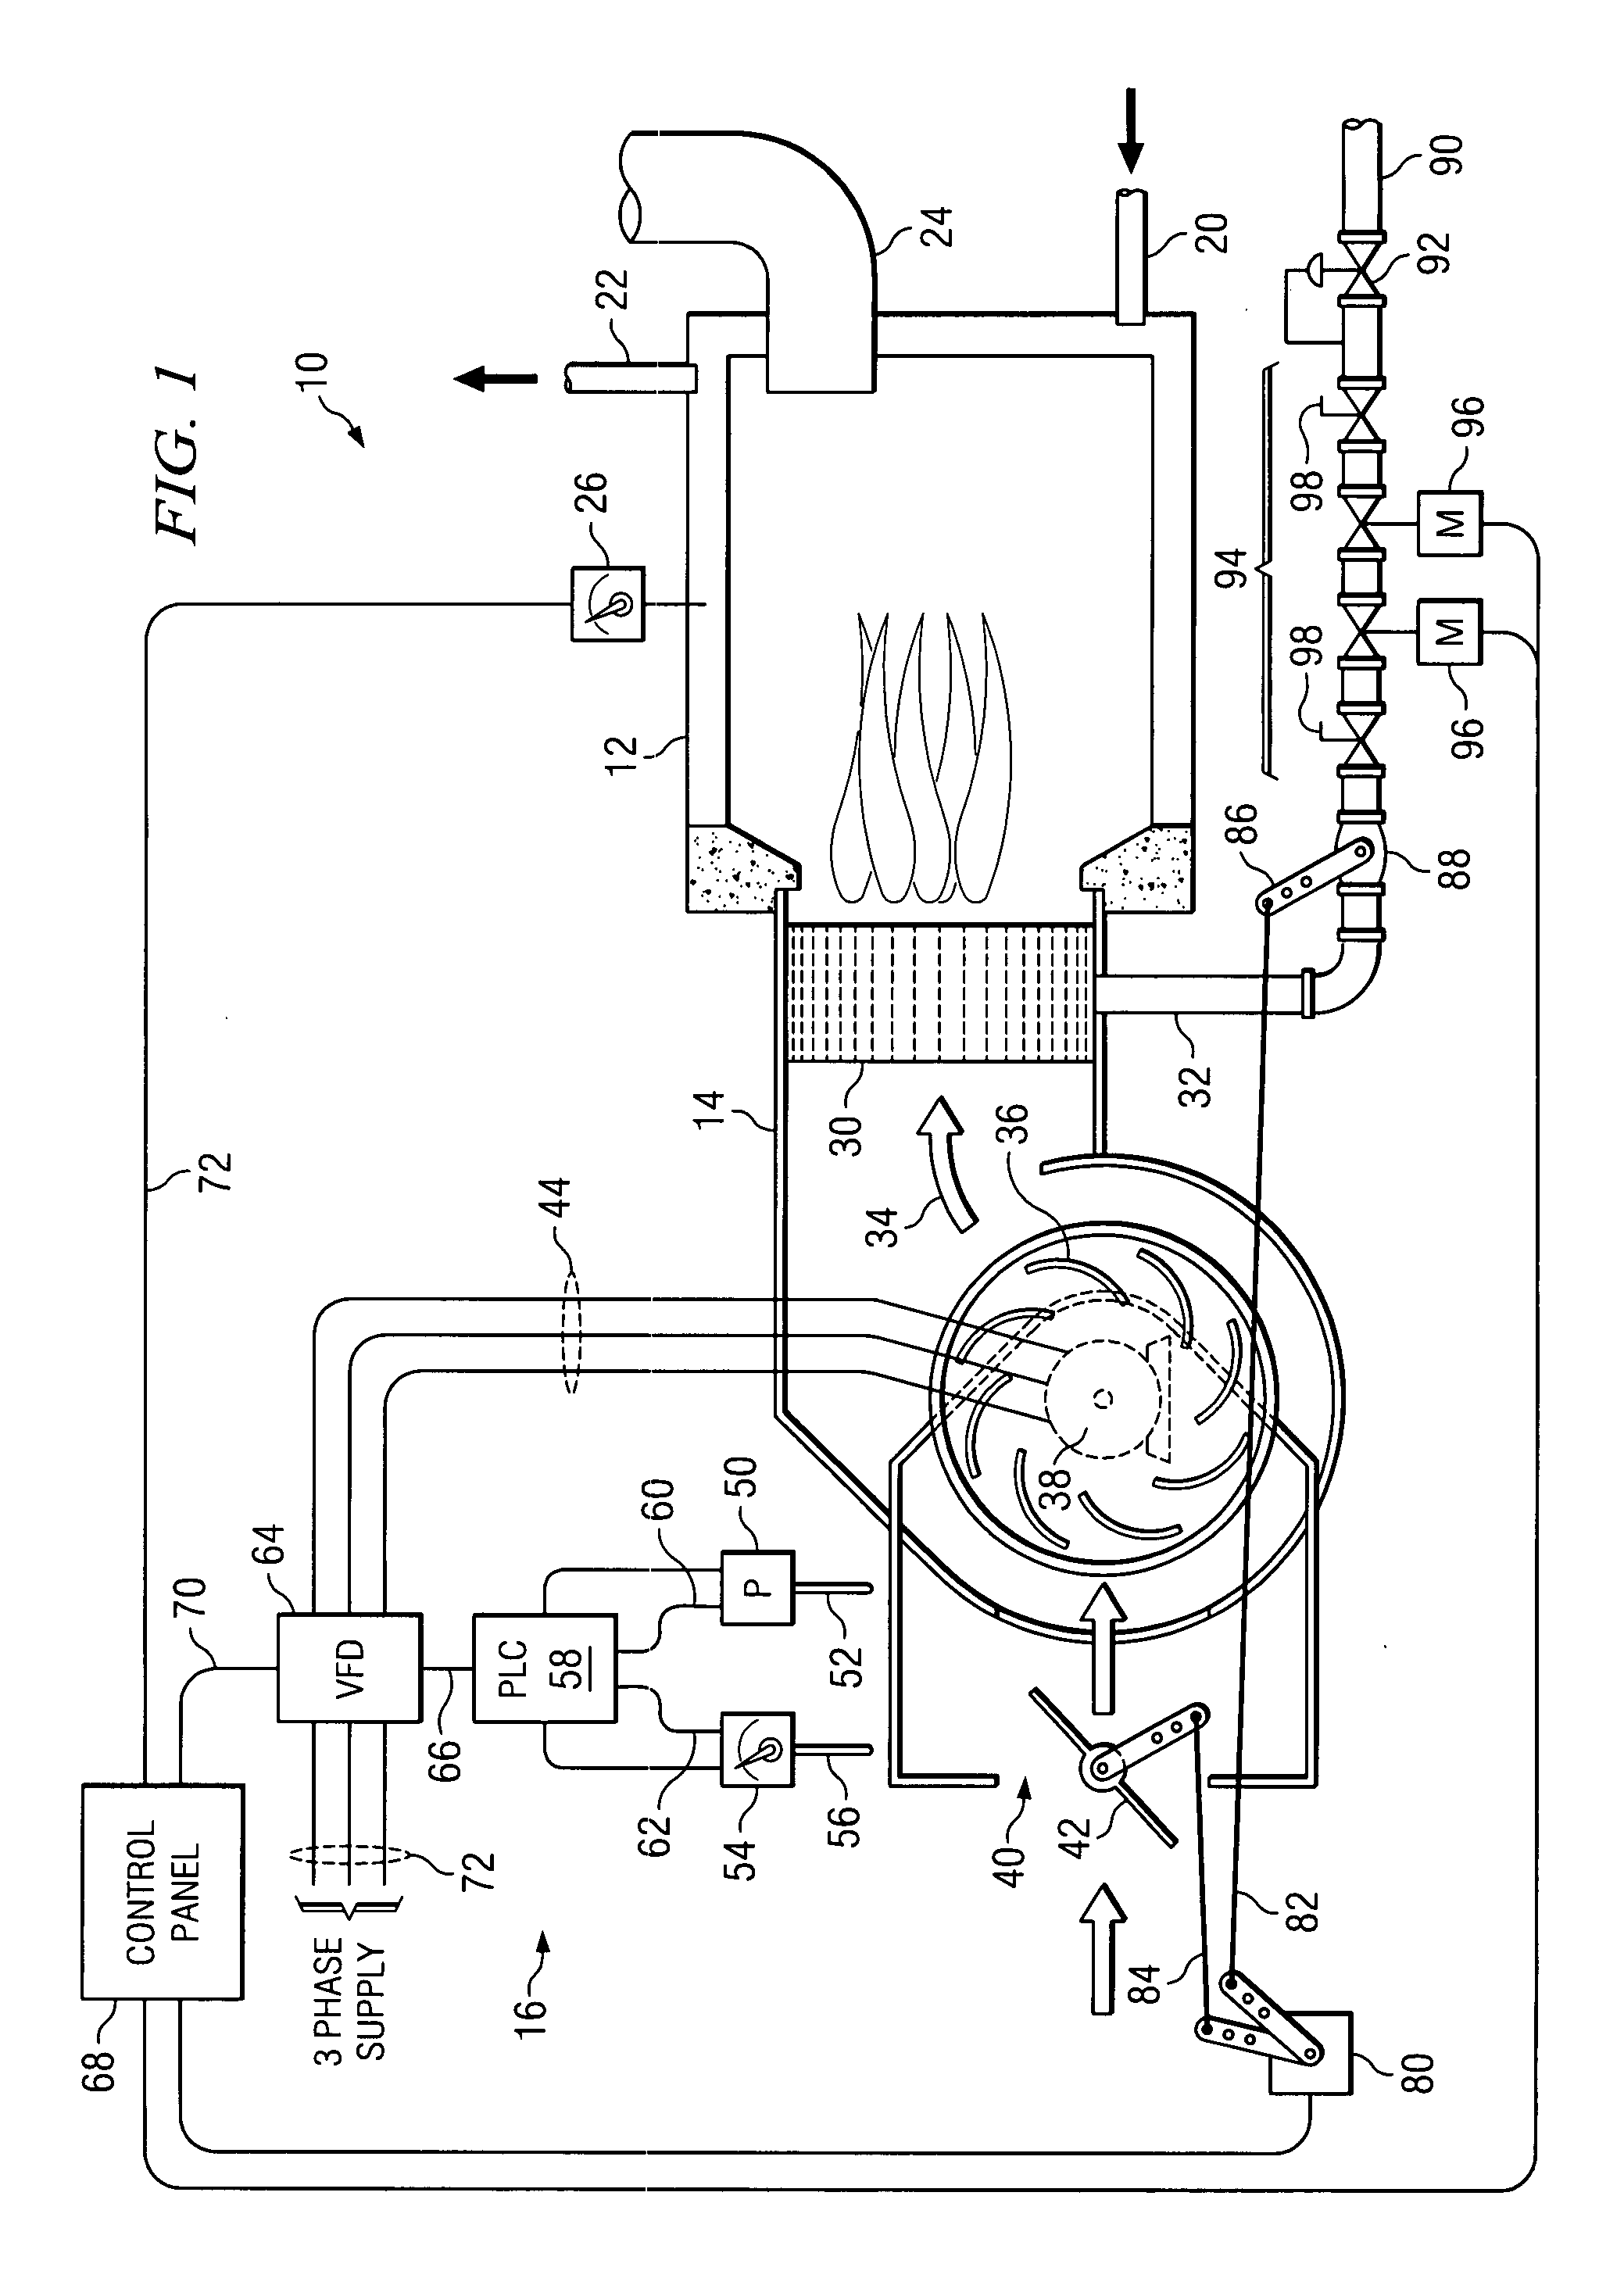 Method and apparatus for controlling combustion in a burner